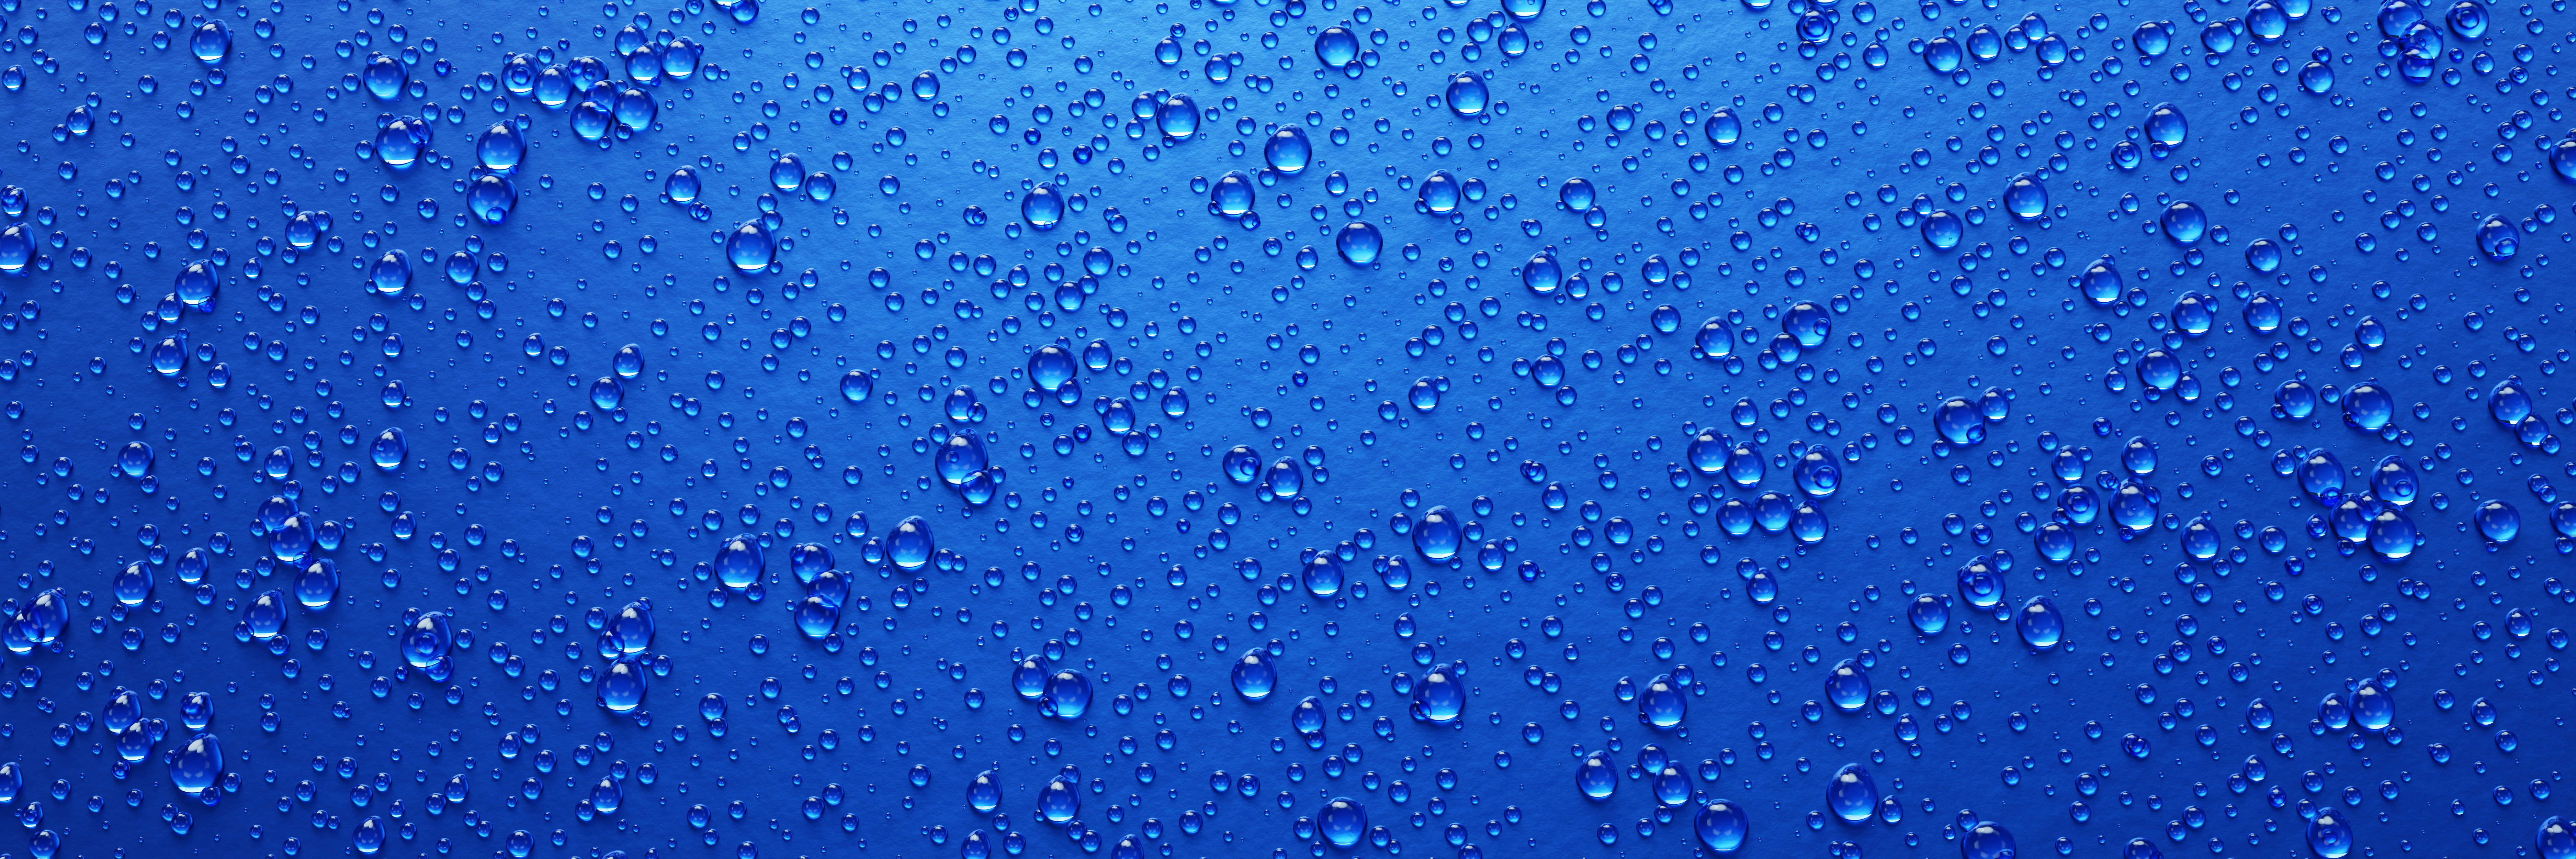 Water Background Stock Photos, Images and Backgrounds for Free Download